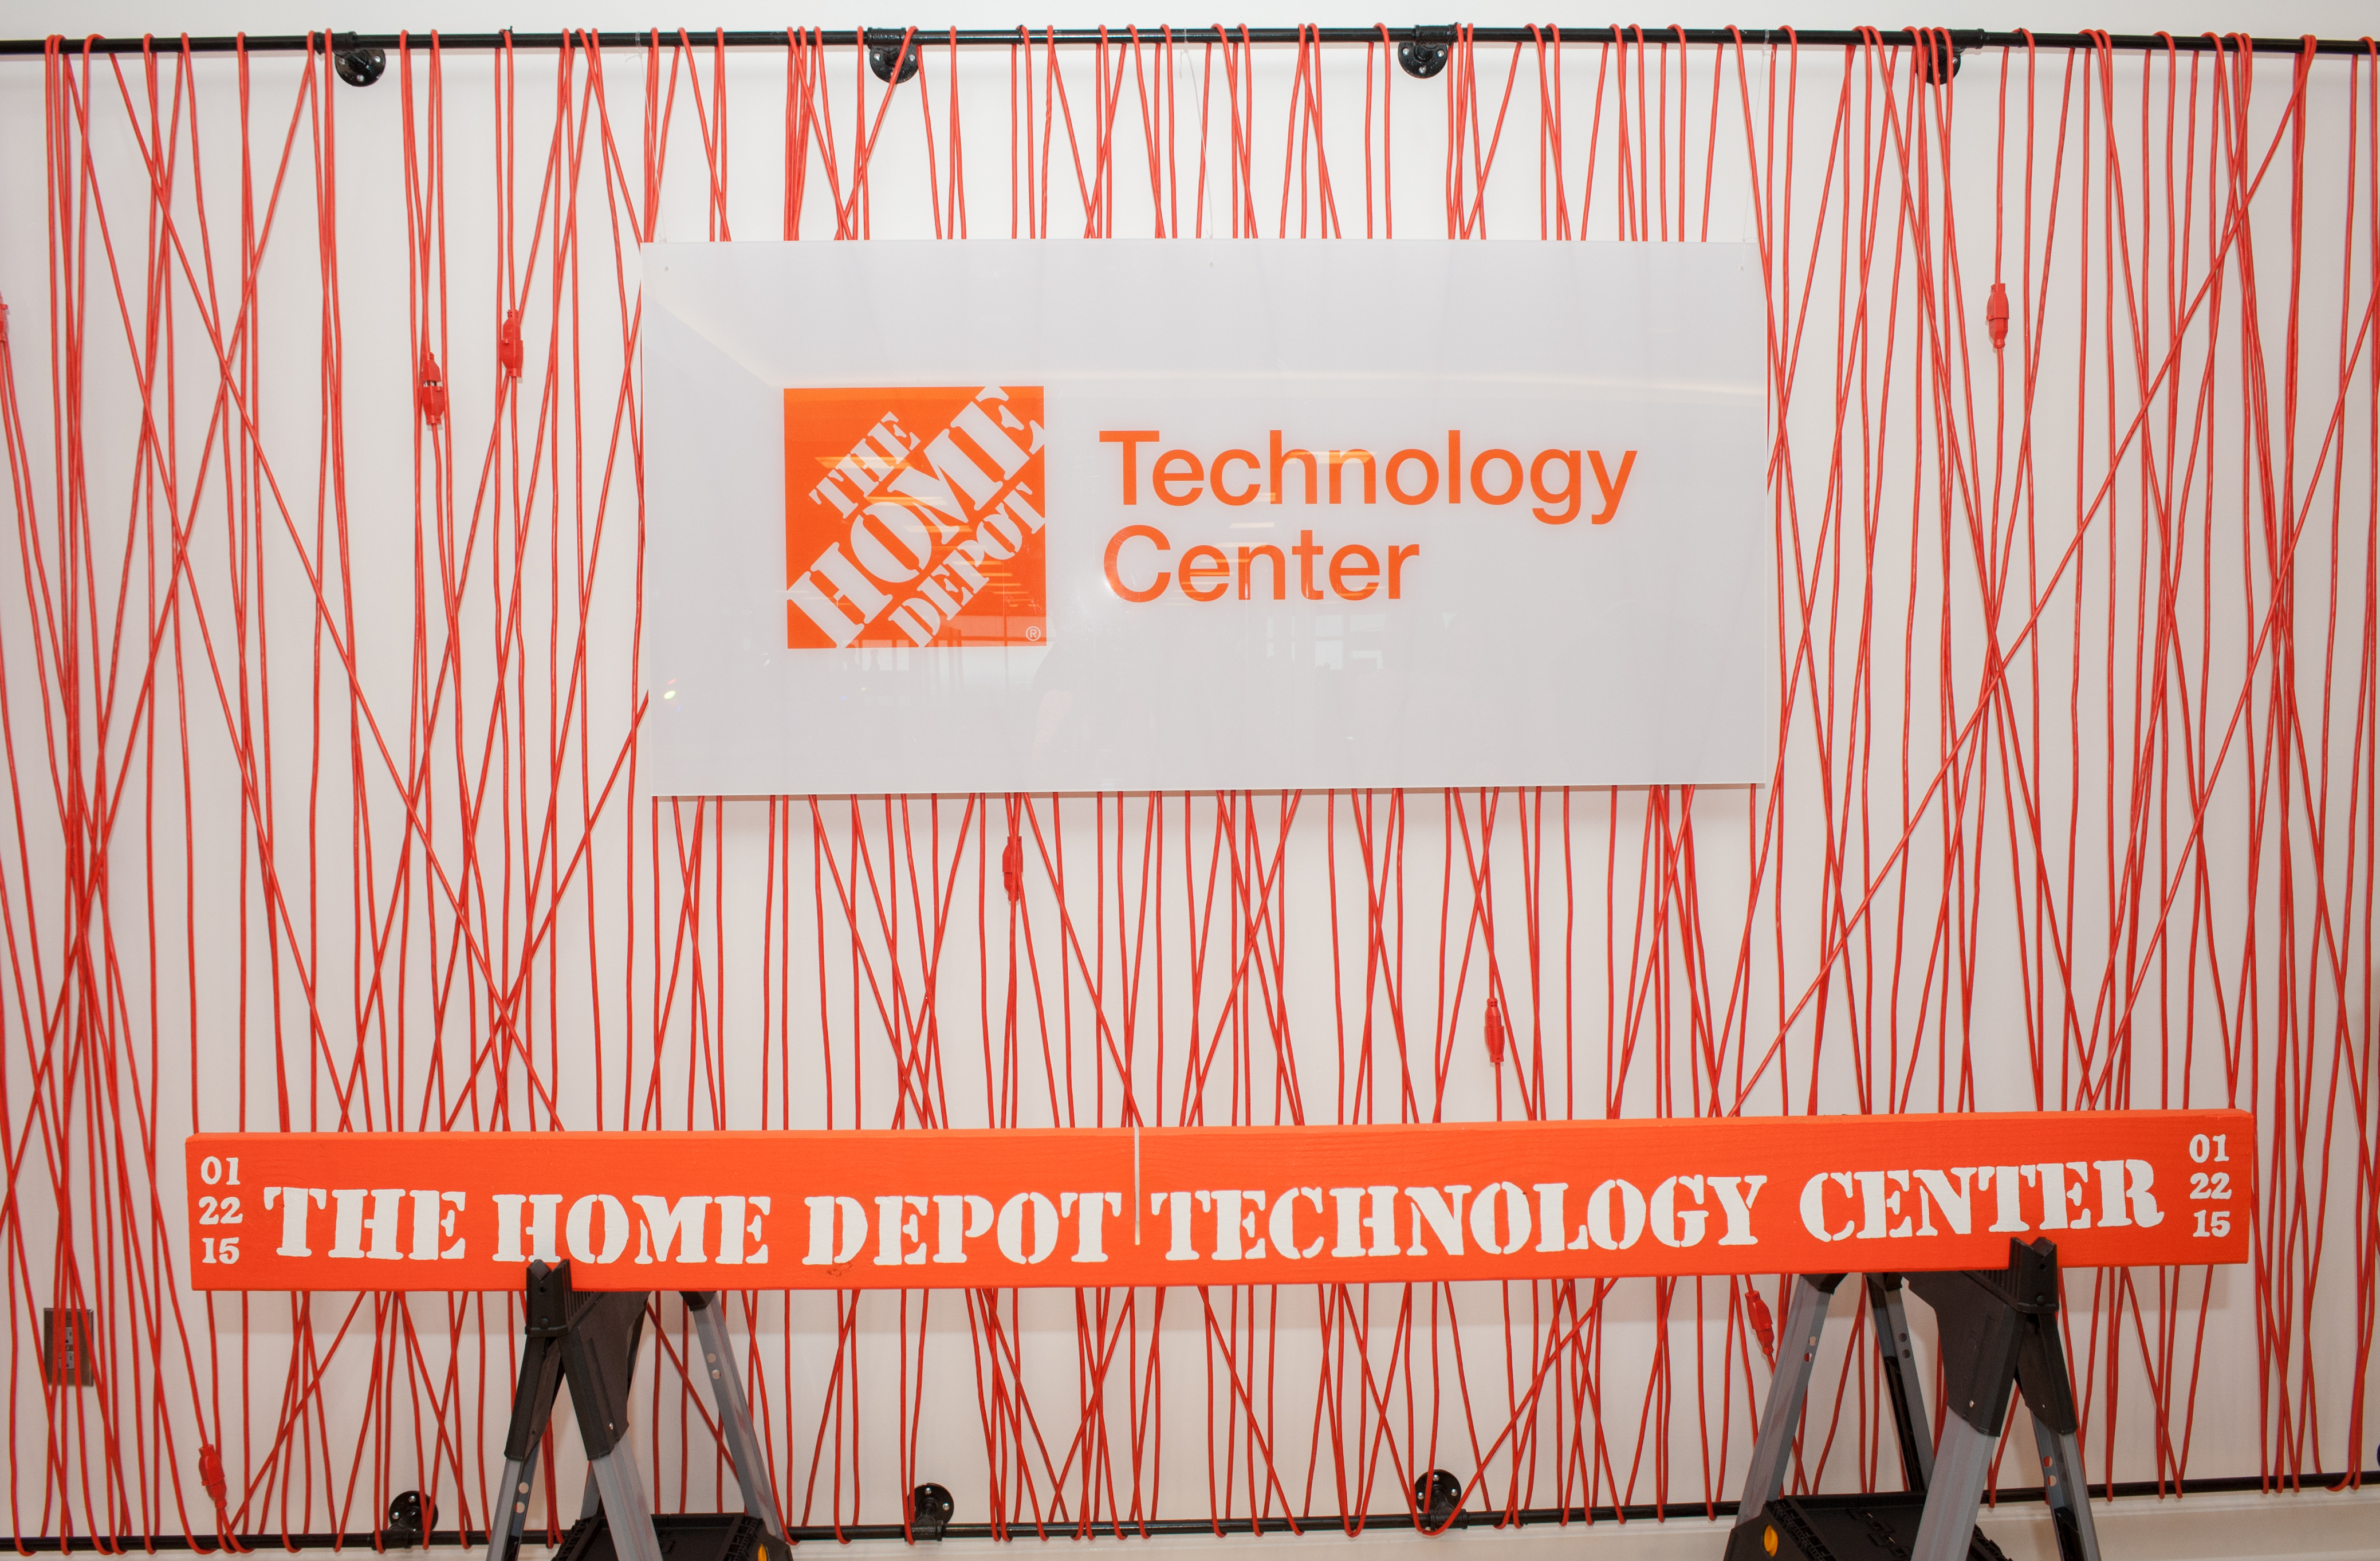 The Home Depot Technology Center allows Tech students and The Home Depot collaborate on new technology and strategic initiatives for the company.